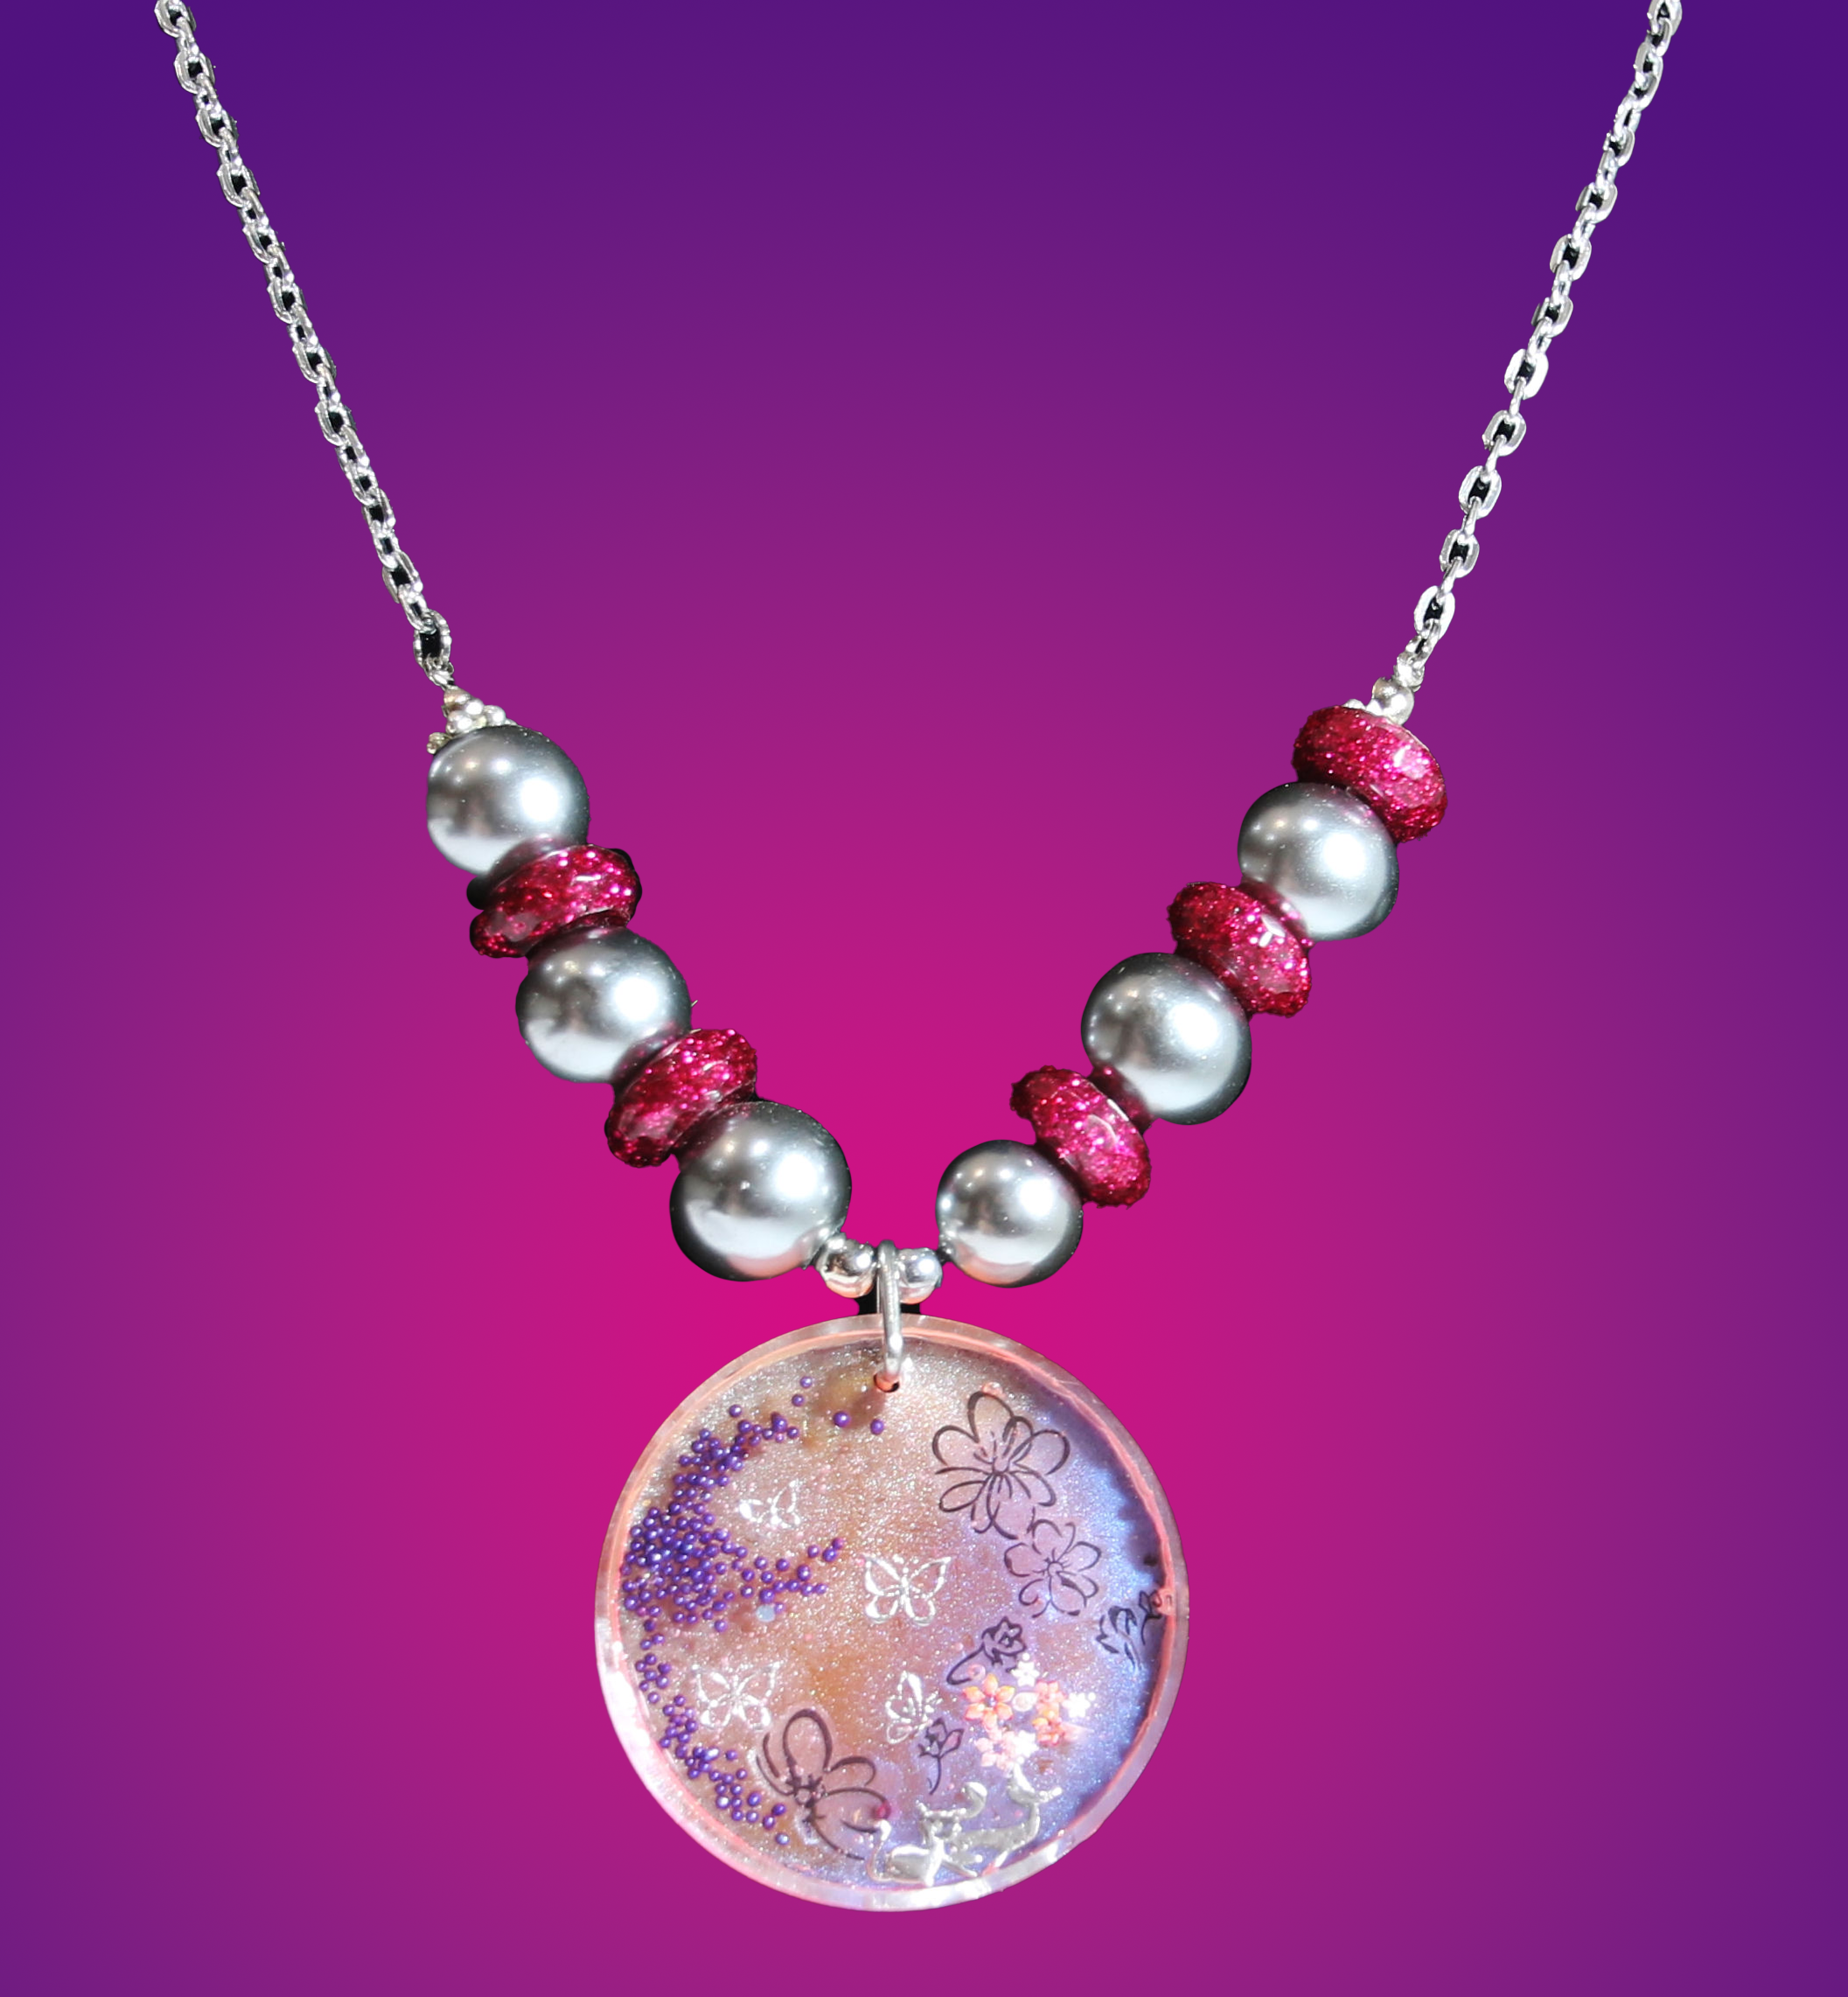 Round Pink and Silver Pendant with Microbeads and Silver Butterflies Necklace